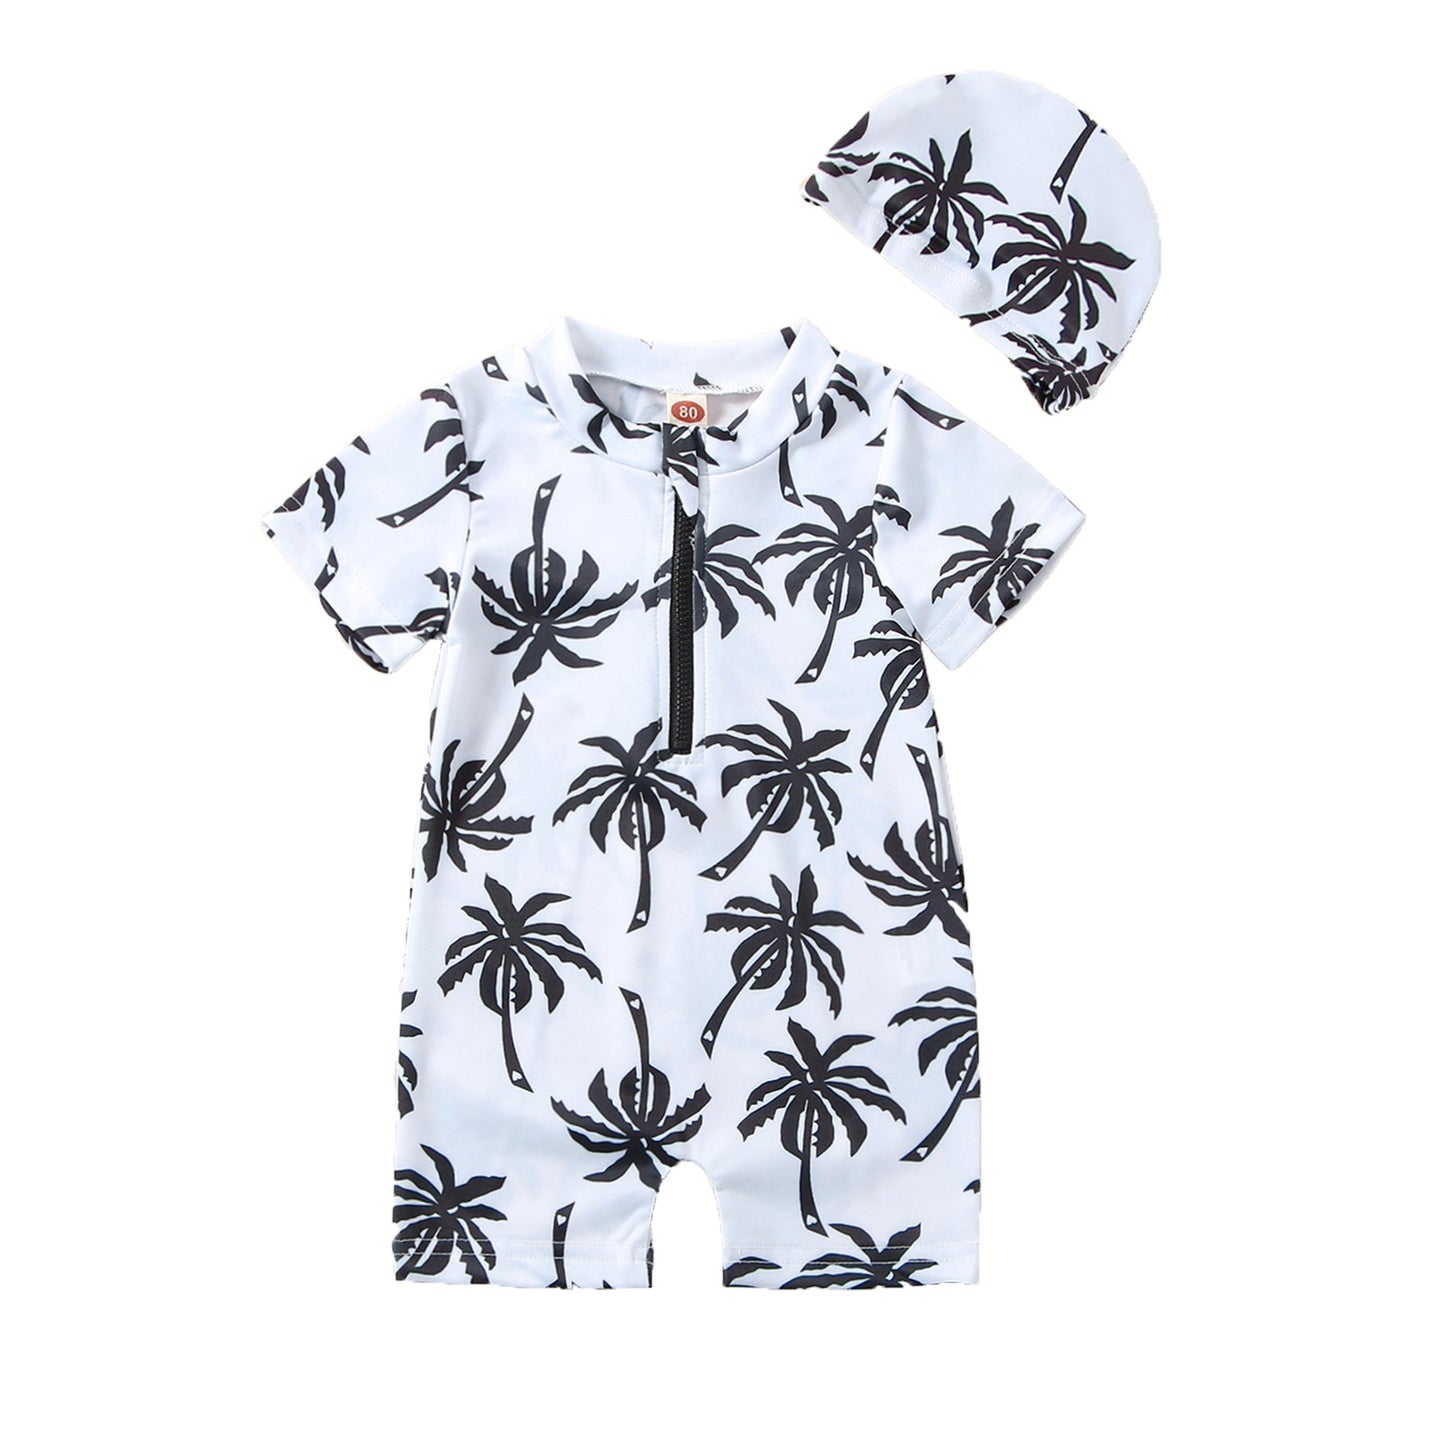 Toddler Boy Swimsuit with Swimming Hat Cartoon Tree Print Short Sleeve Round Neck Half Zipper Swimsuit For Boys